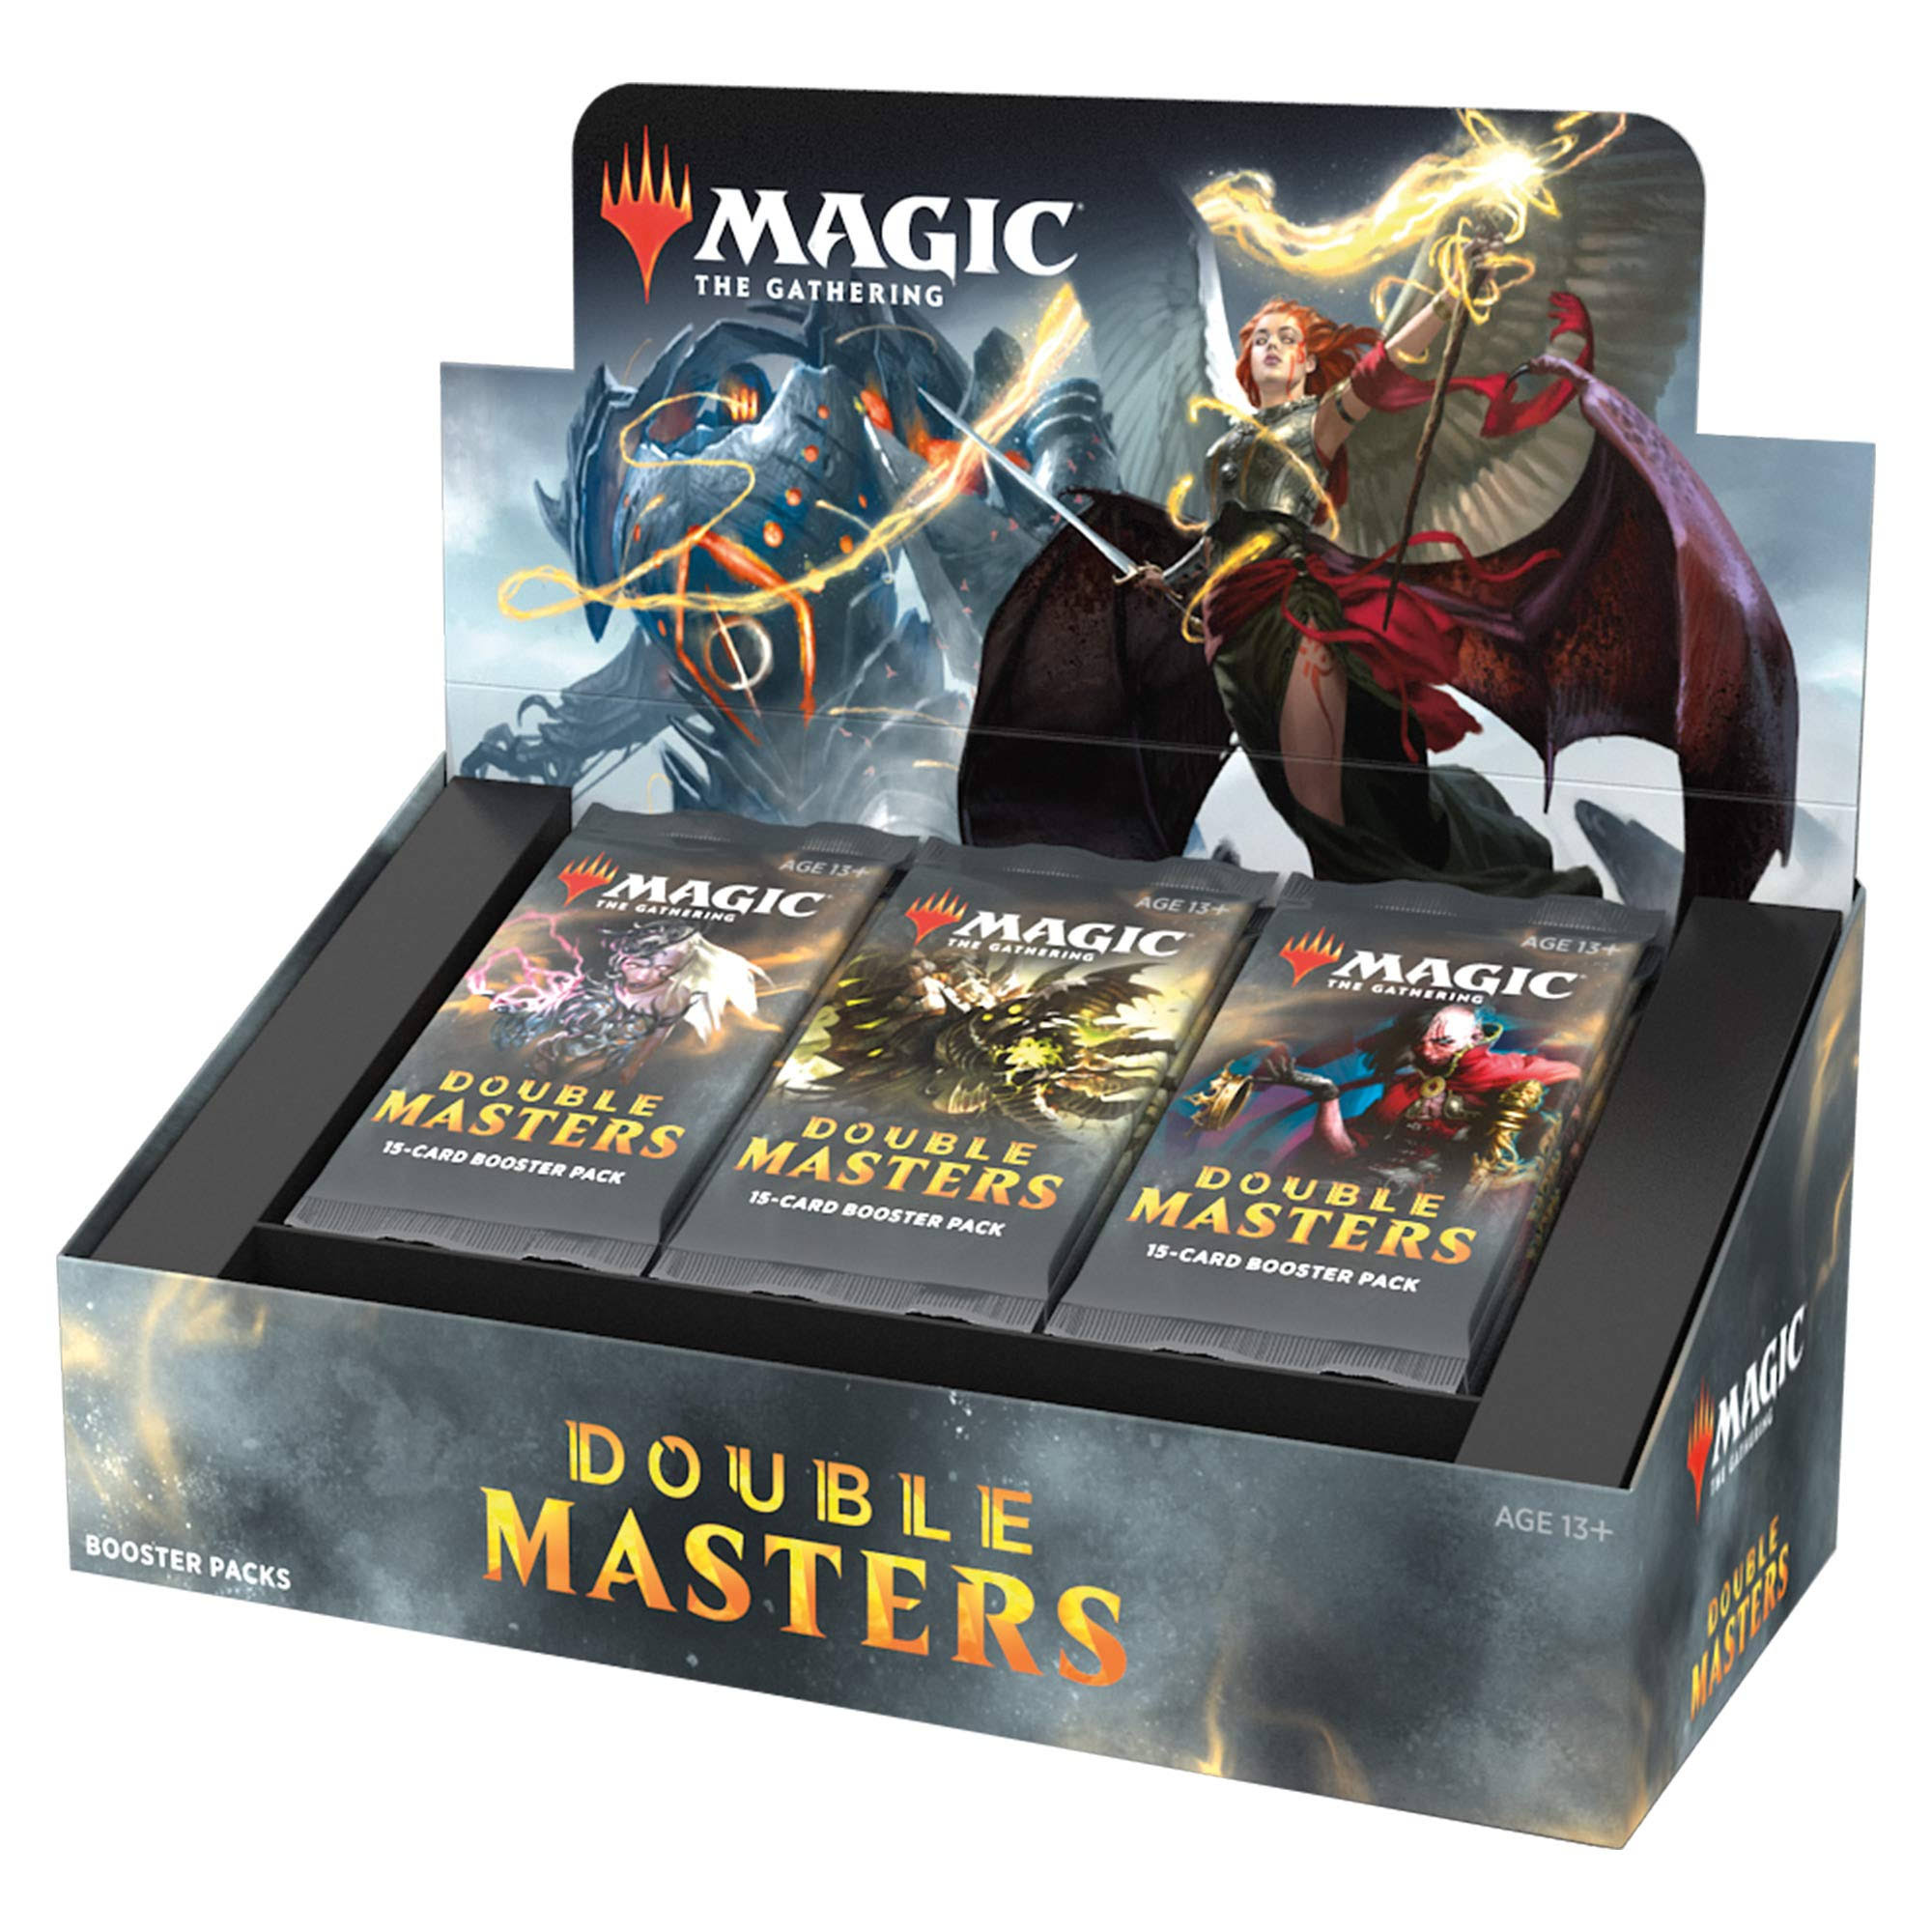 Magic: The Gathering: Booster Box - Double Masters